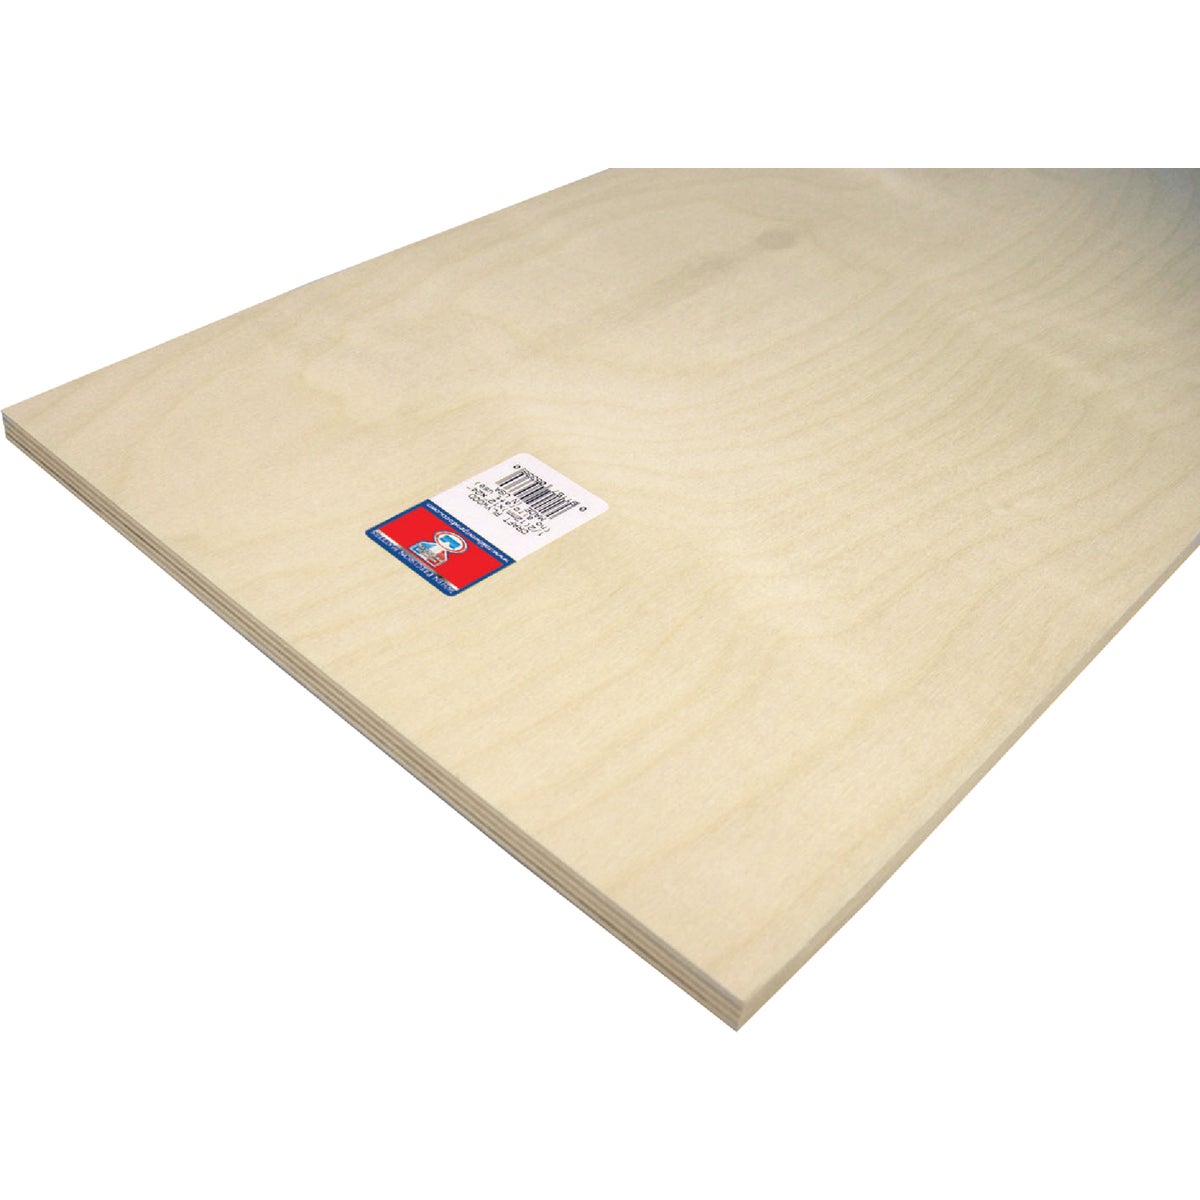 Midwest Products 1/2 In. x 12 In. x 24 In. Birch Plywood